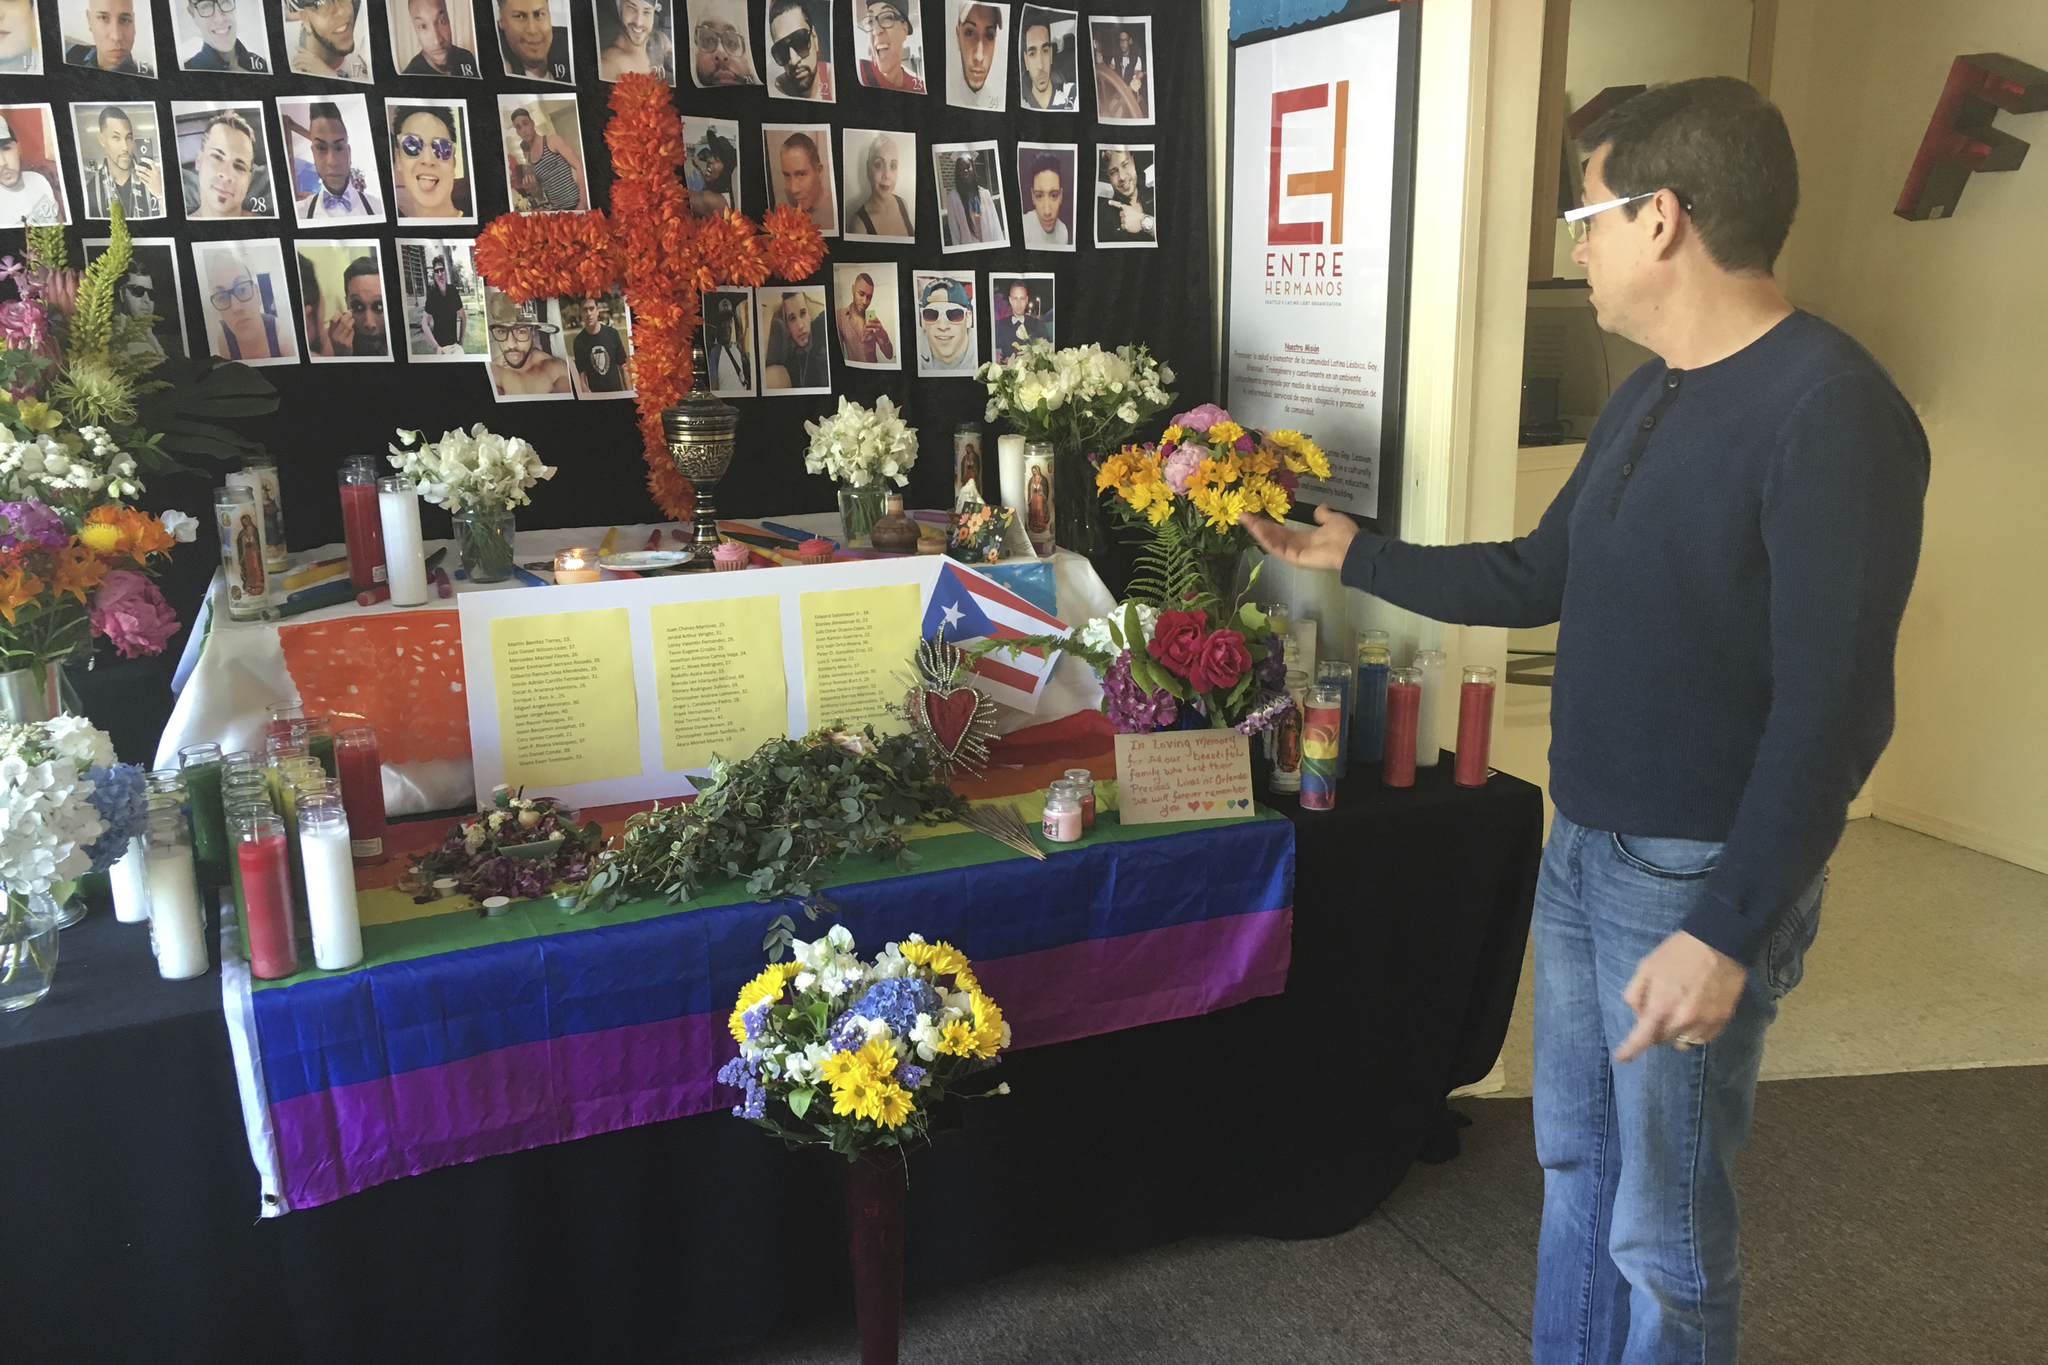 For Seattle’s Gay Latino Community, Orlando Attack Cuts Extra Deep